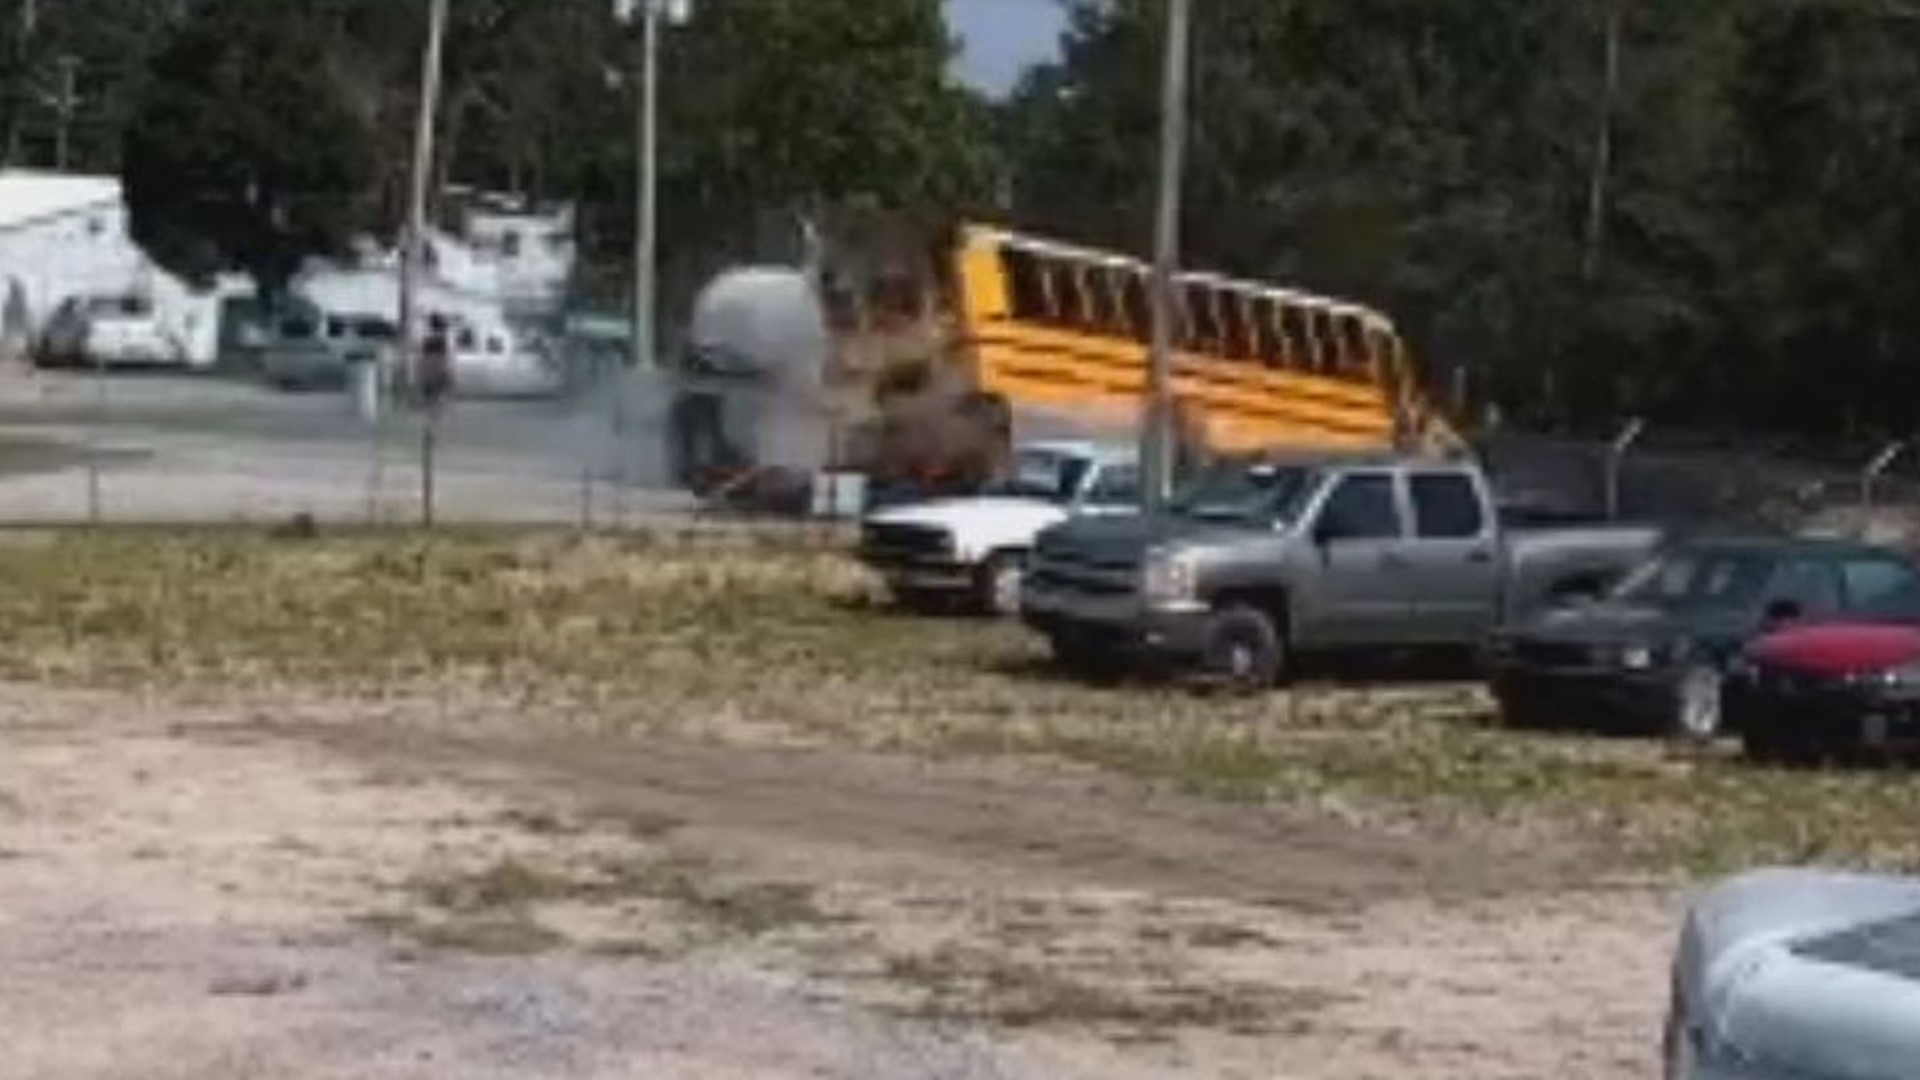 A crash between a South Carolina school bus and a tanker truck was caught on camera.